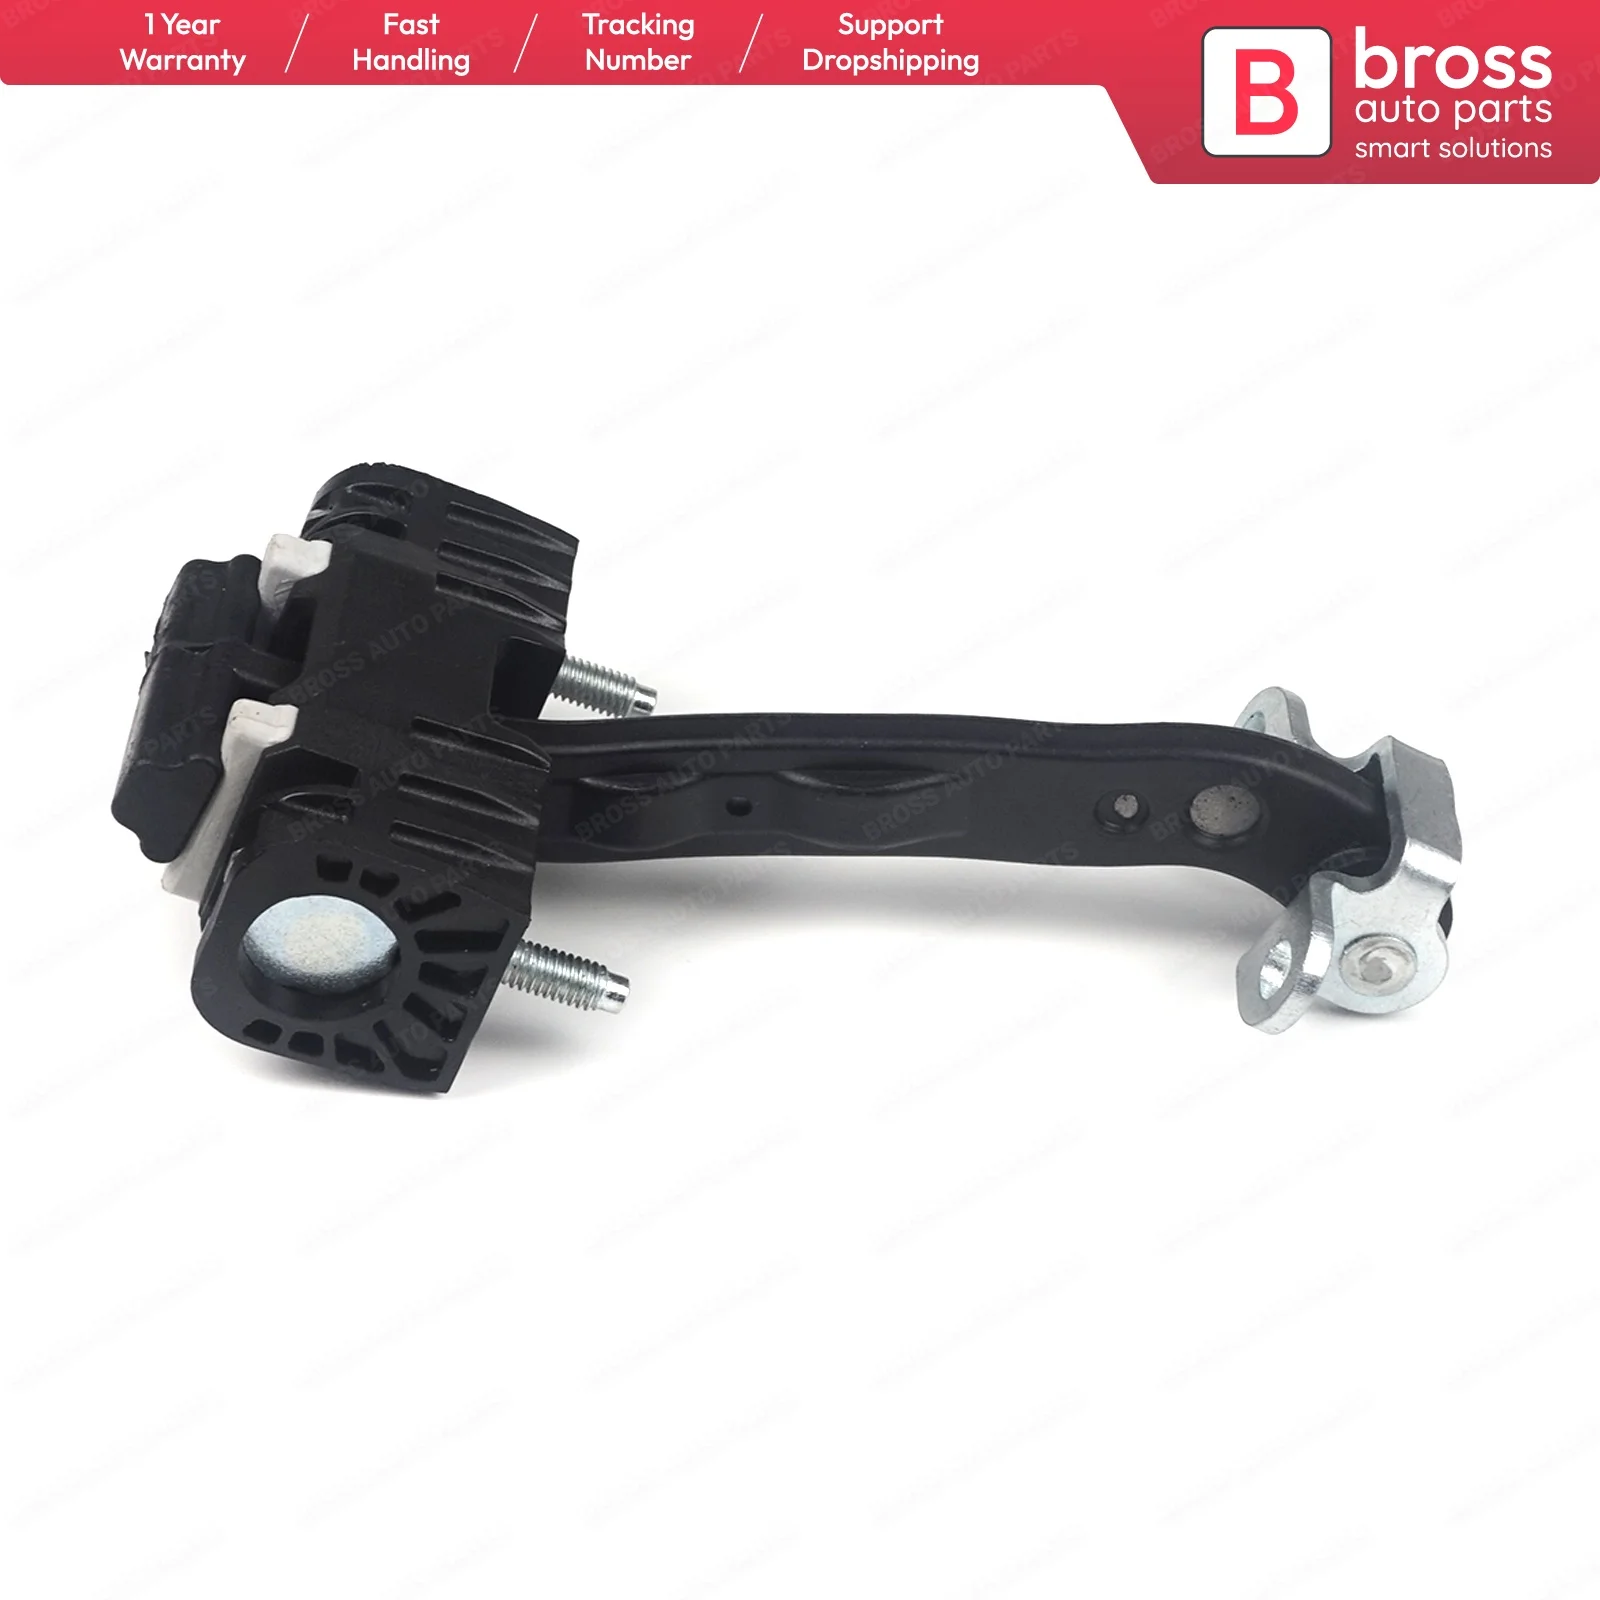 

Bross Auto Parts BDP695 Front Door Hinge Stop Check Strap Limiter 1358220080 for Fiat Ducato Boxer Jumper Relay Ship From Turkey